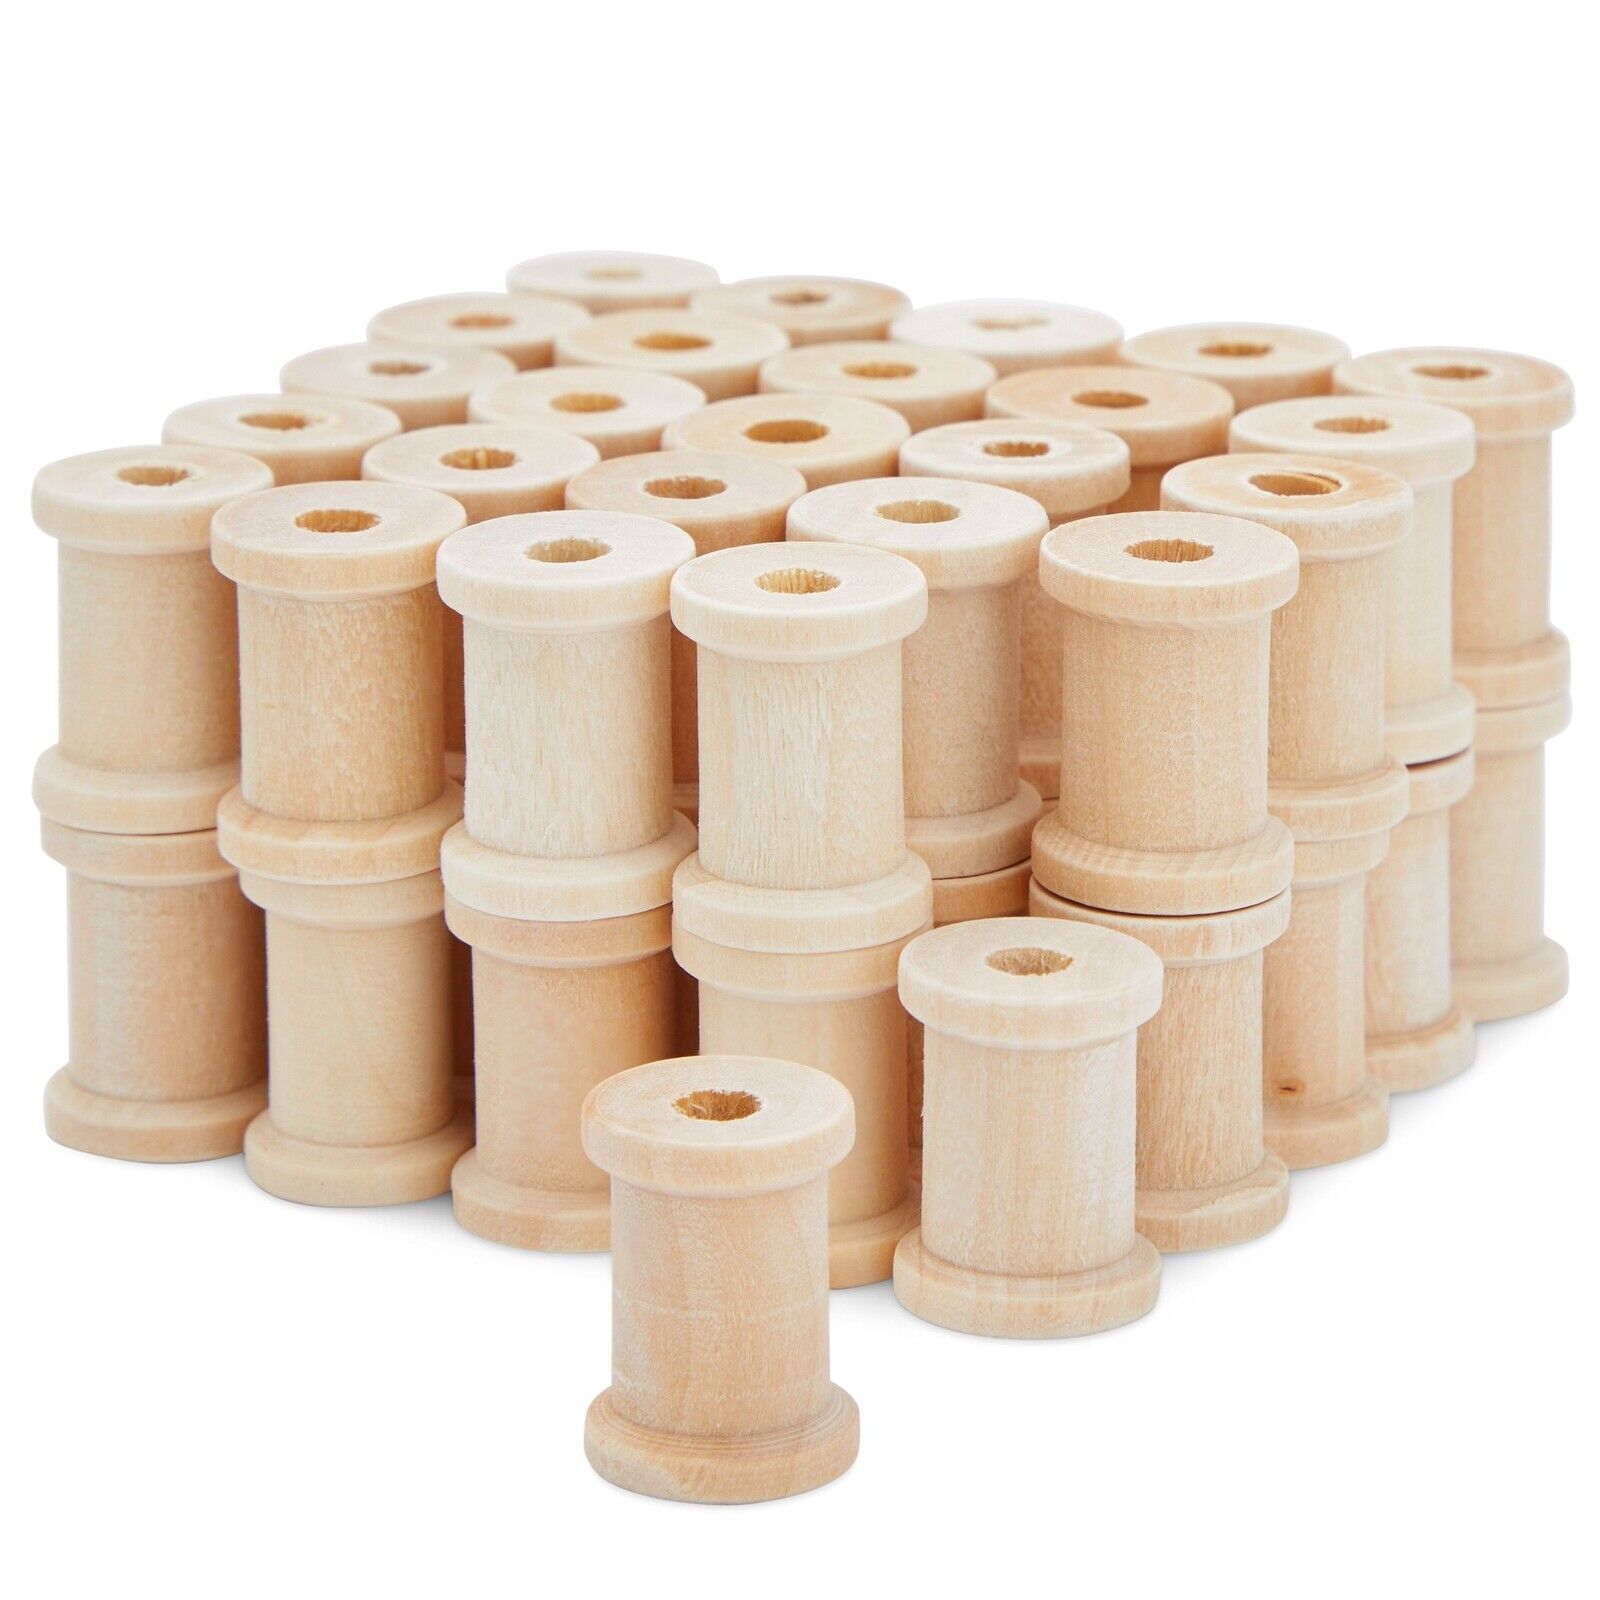 50 Pack Empty Wooden Thread Spools for Arts and Crafts, 0.75 x 1 In, 0.6 cm Hole